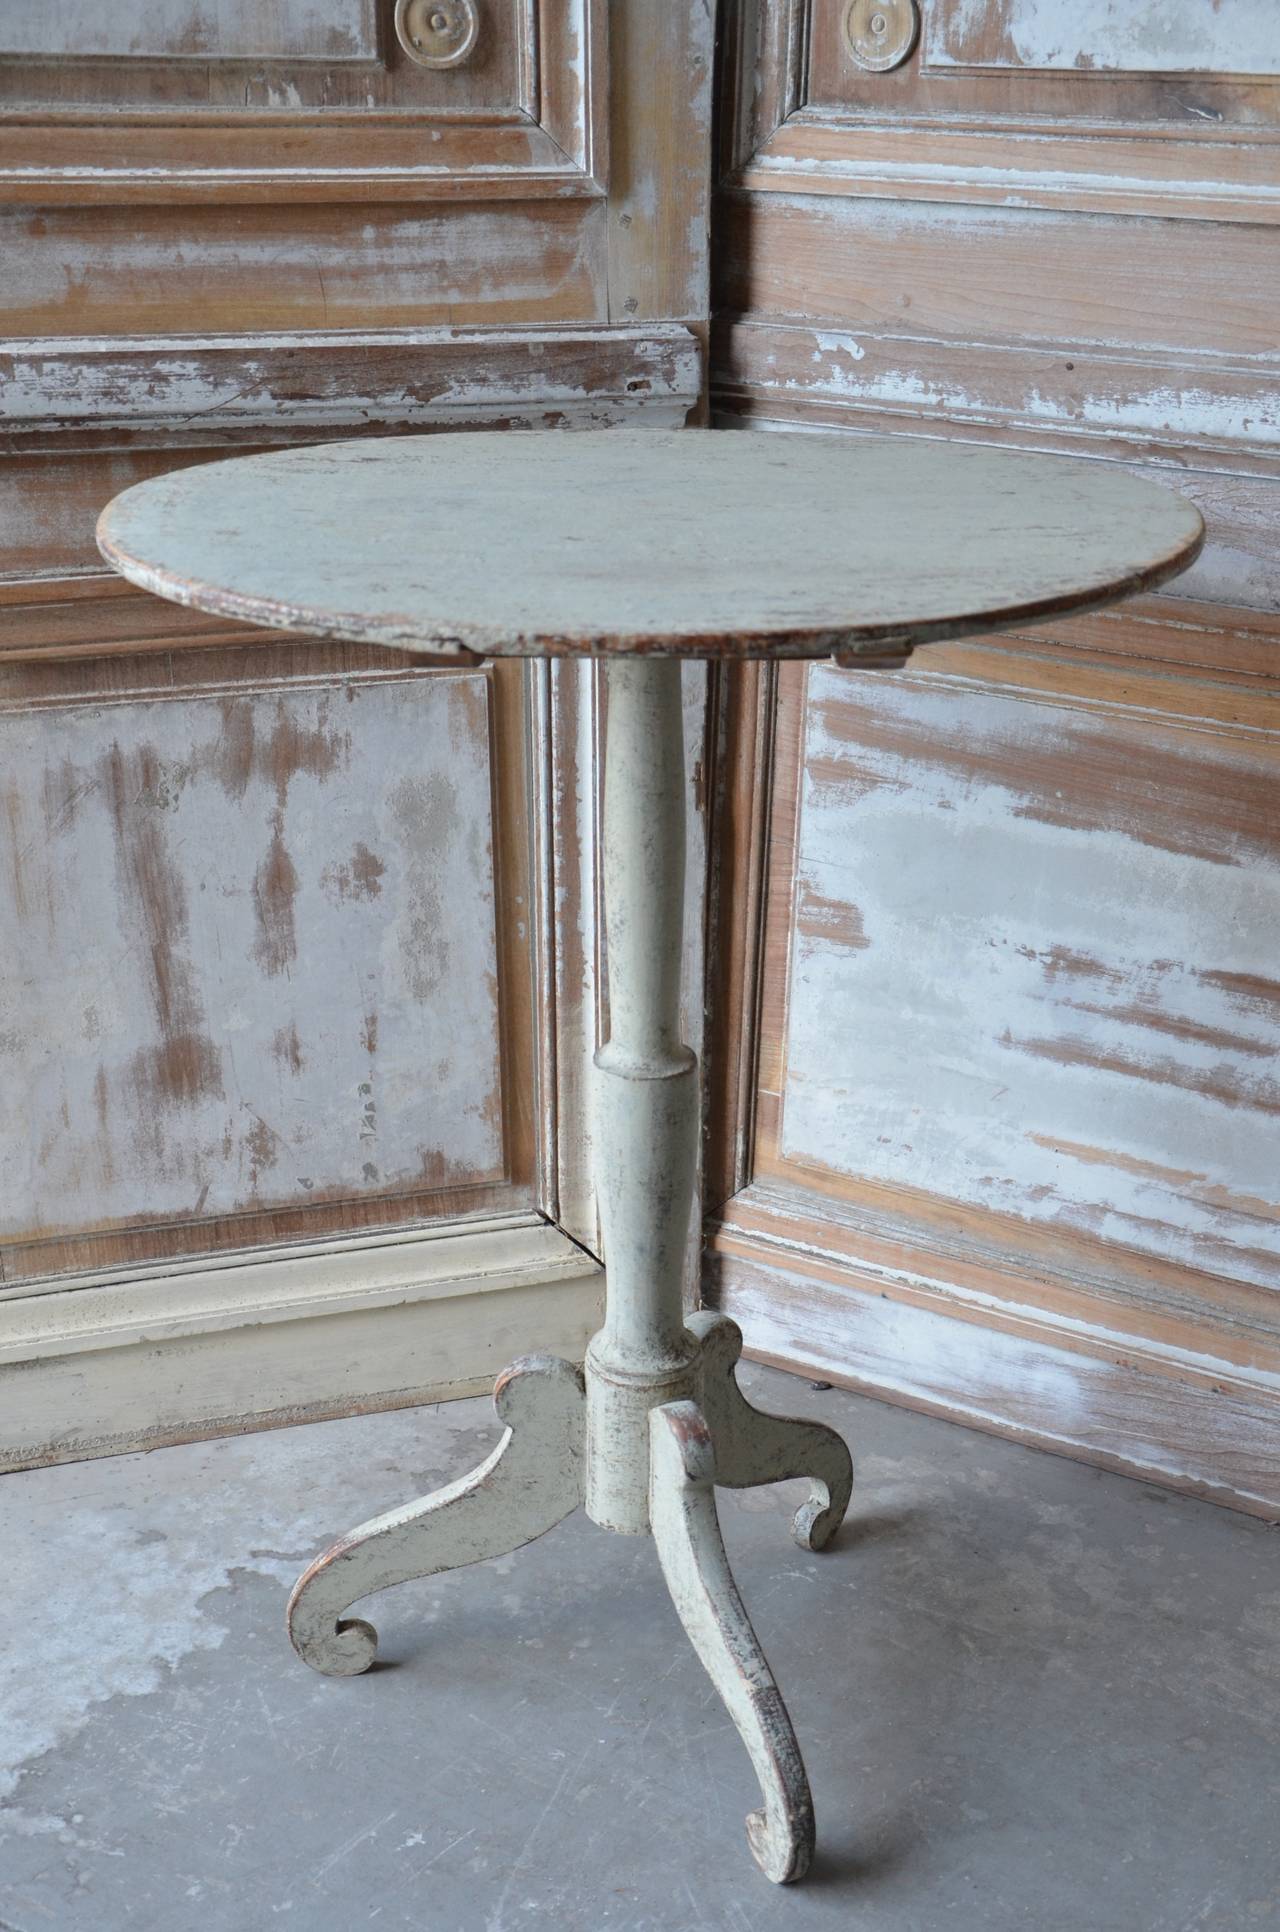 A round tilt top pedestal table, Sweden Gustavian period, circa 1830 with turned base supported by beautifully carved legs. Scrape back to traces of its original color.
Rich farm in Värmland, Sweden circa 1810